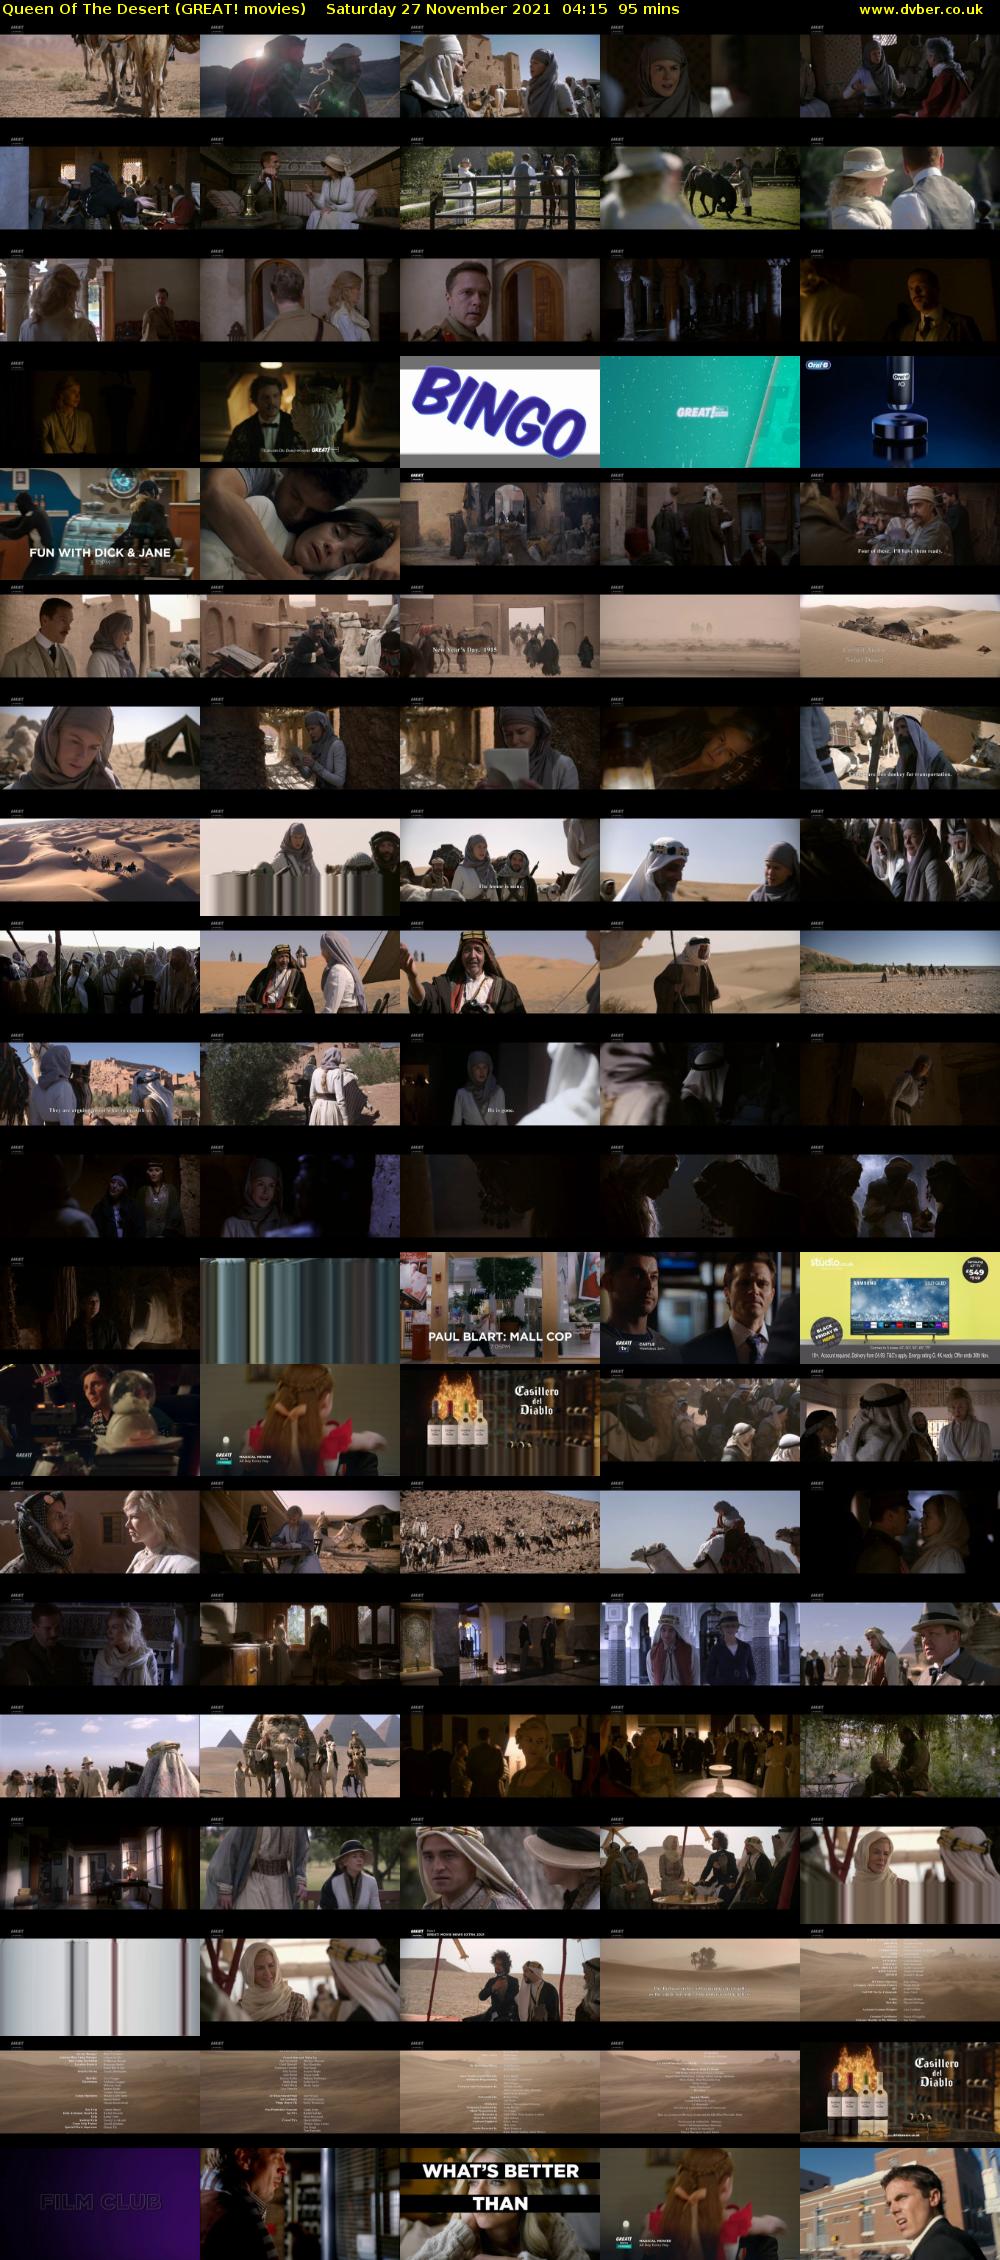 Queen Of The Desert (GREAT! movies) Saturday 27 November 2021 04:15 - 05:50